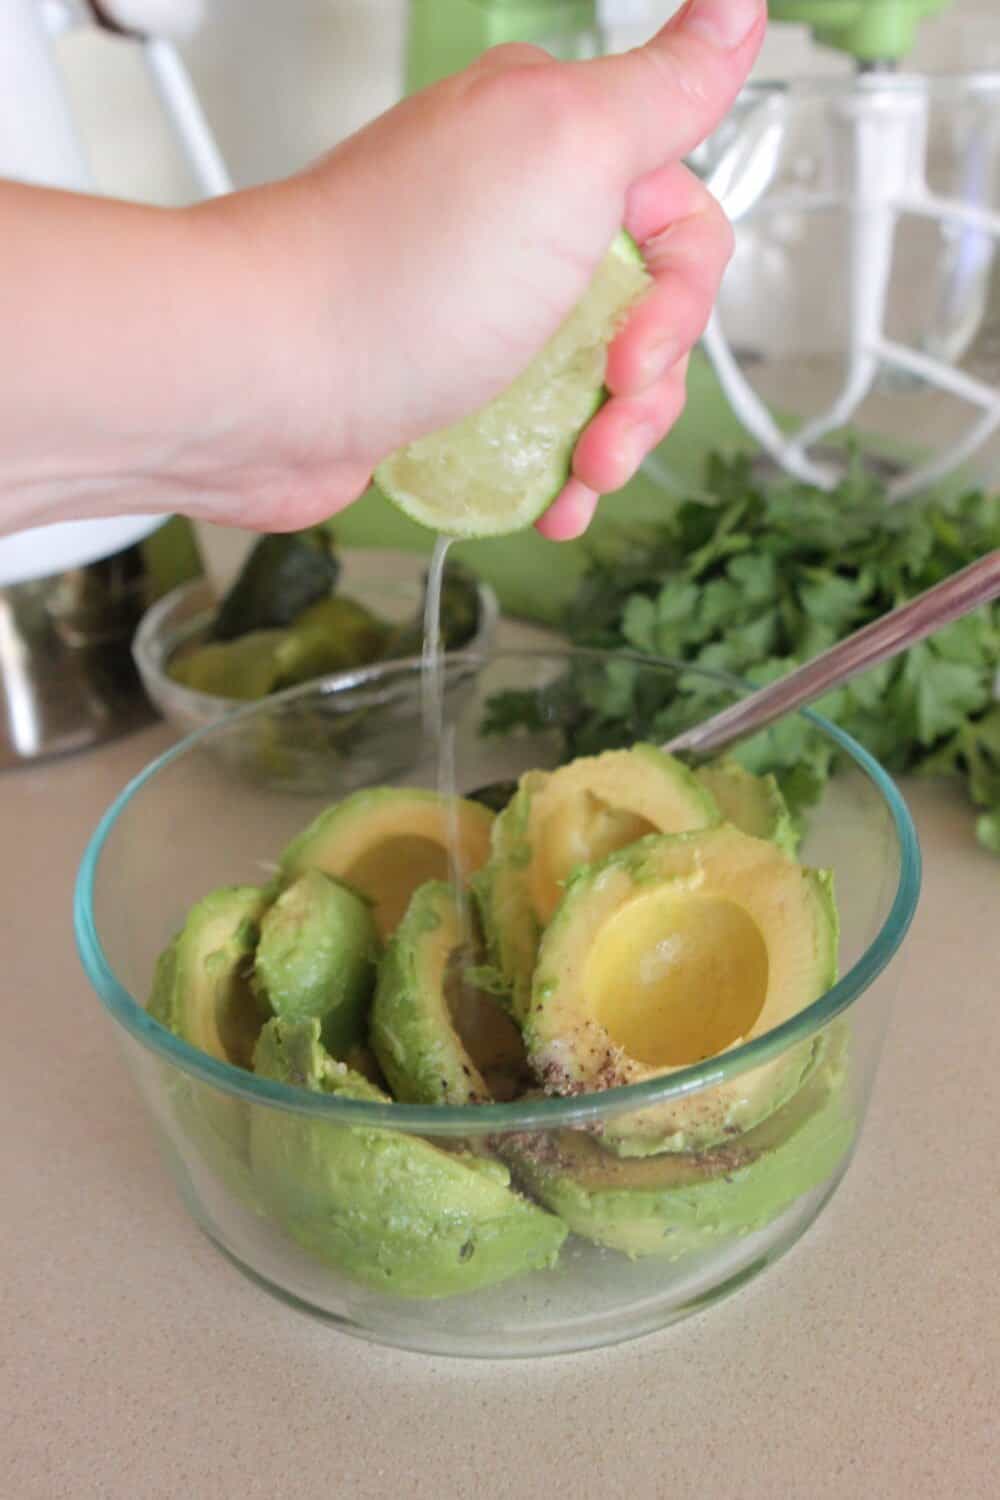 squeezing fresh lime in bowl of avocados